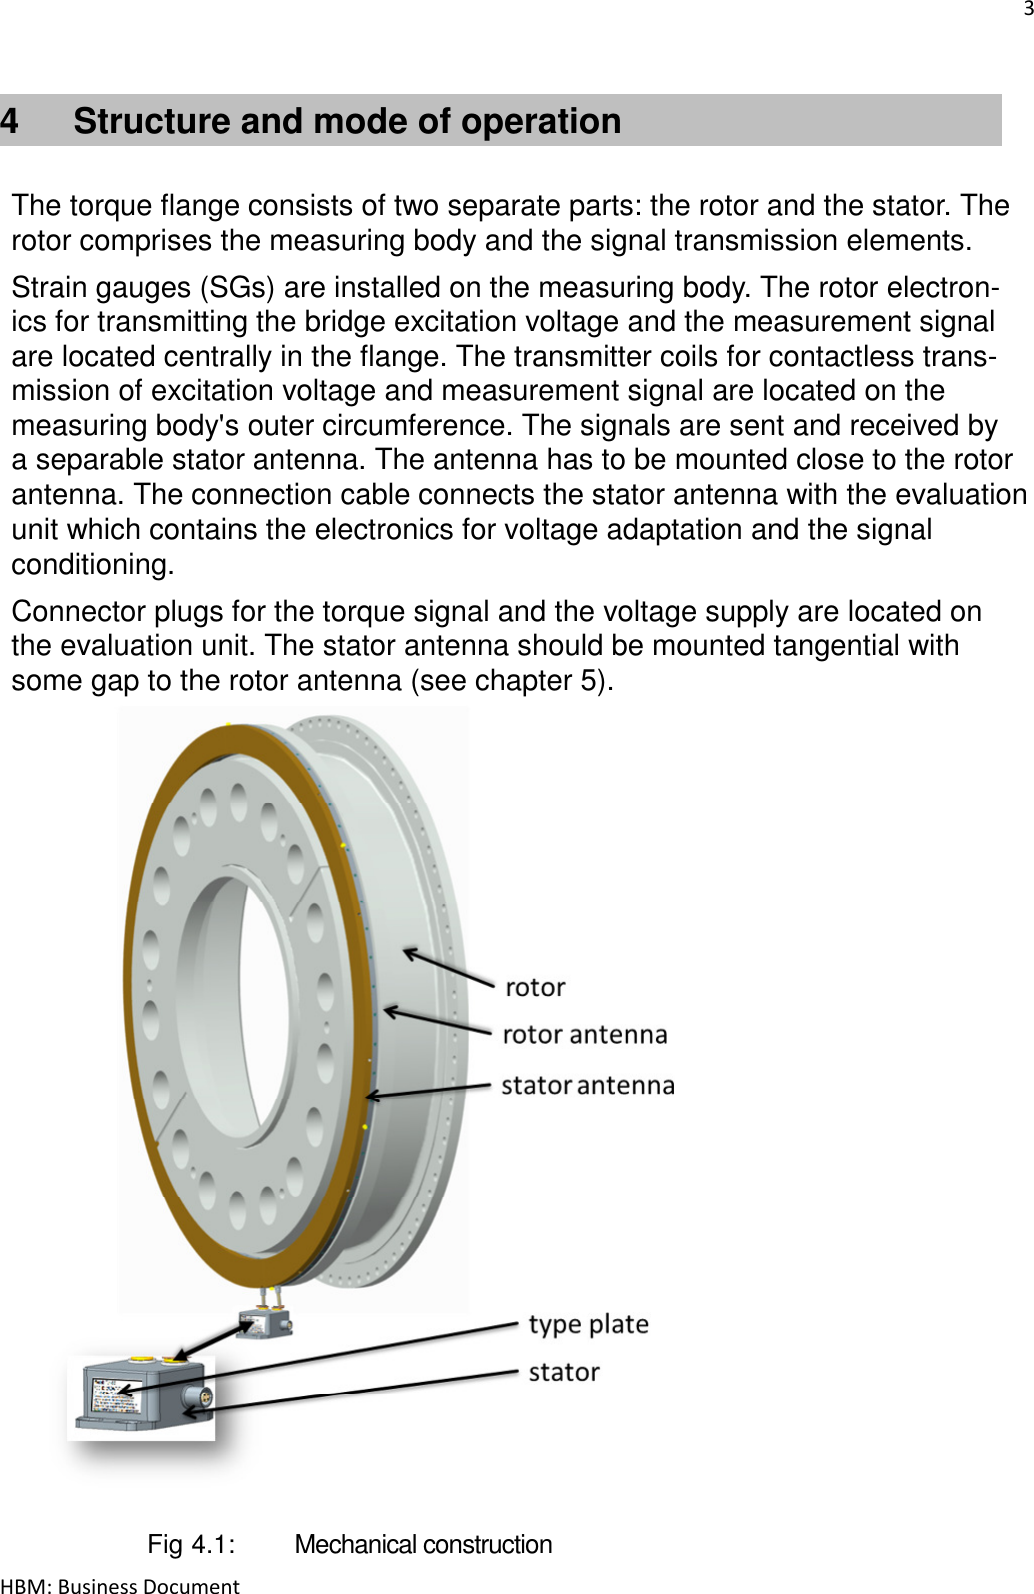 3  HBM: Business Document 4  Structure and mode of operation   The torque flange consists of two separate parts: the rotor and the stator. The rotor comprises the measuring body and the signal transmission elements.  Strain gauges (SGs) are installed on the measuring body. The rotor electron- ics for transmitting the bridge excitation voltage and the measurement signal are located centrally in the flange. The transmitter coils for contactless trans- mission of excitation voltage and measurement signal are located on the measuring body&apos;s outer circumference. The signals are sent and received by a separable stator antenna. The antenna has to be mounted close to the rotor antenna. The connection cable connects the stator antenna with the evaluation unit which contains the electronics for voltage adaptation and the signal conditioning.  Connector plugs for the torque signal and the voltage supply are located on the evaluation unit. The stator antenna should be mounted tangential with some gap to the rotor antenna (see chapter 5).                          Fig 4.1:   Mechanical construction 